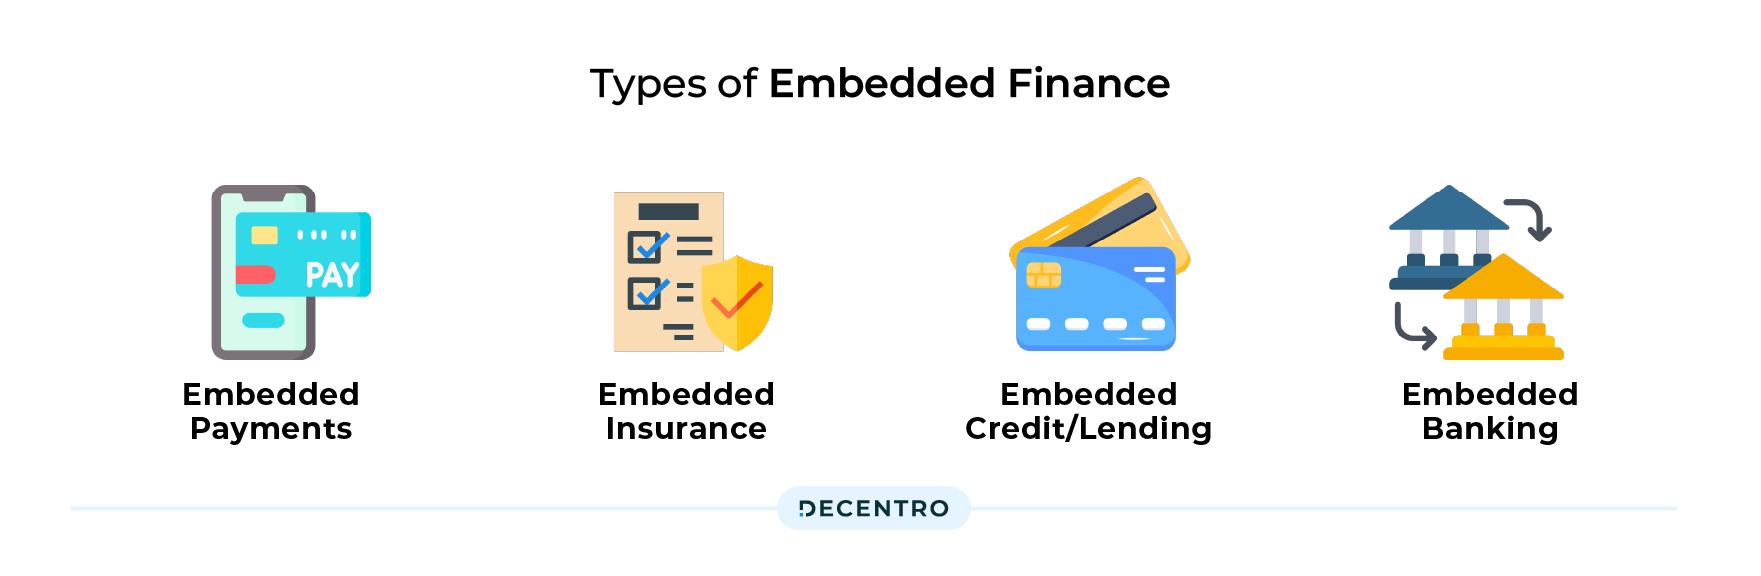 Types of Embedded Finance